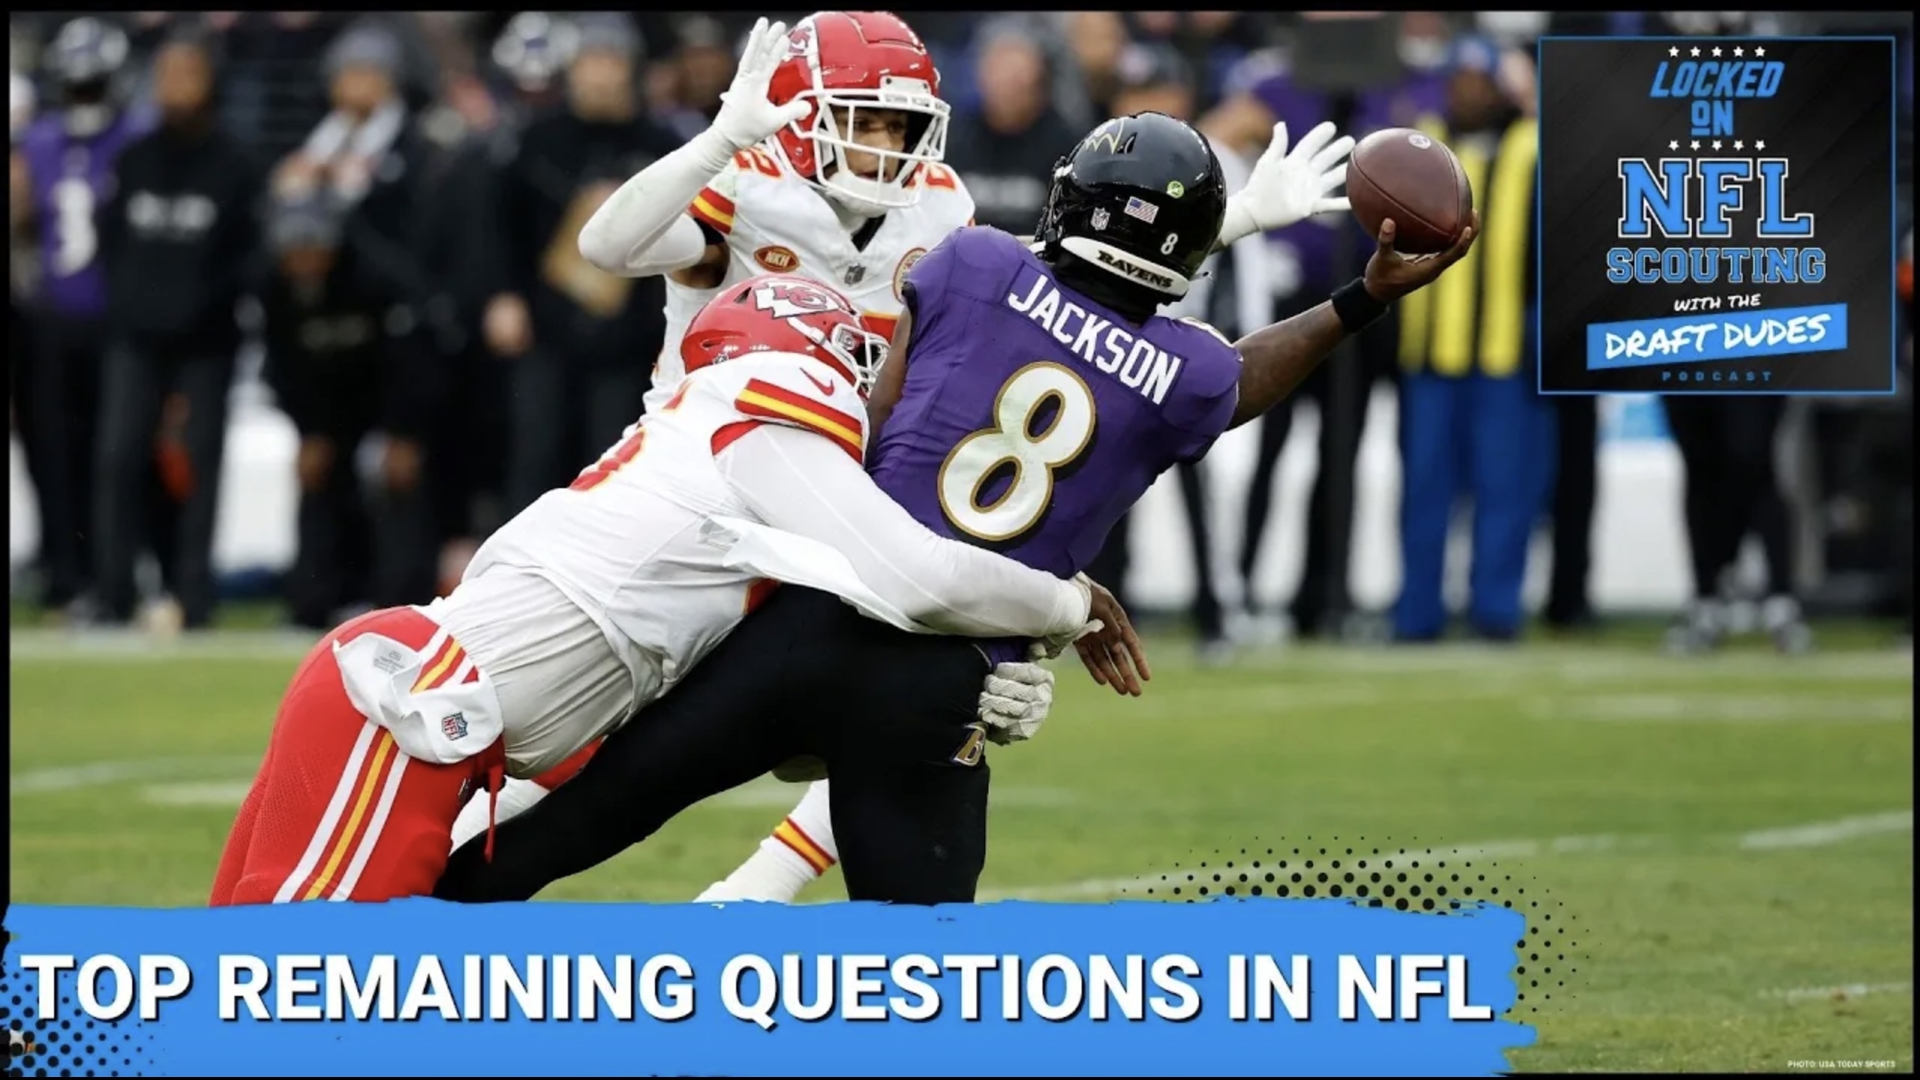 On today's episode, Joe Marino and Kyle Crabbs share their top remaining questions to be answered across the NFL.